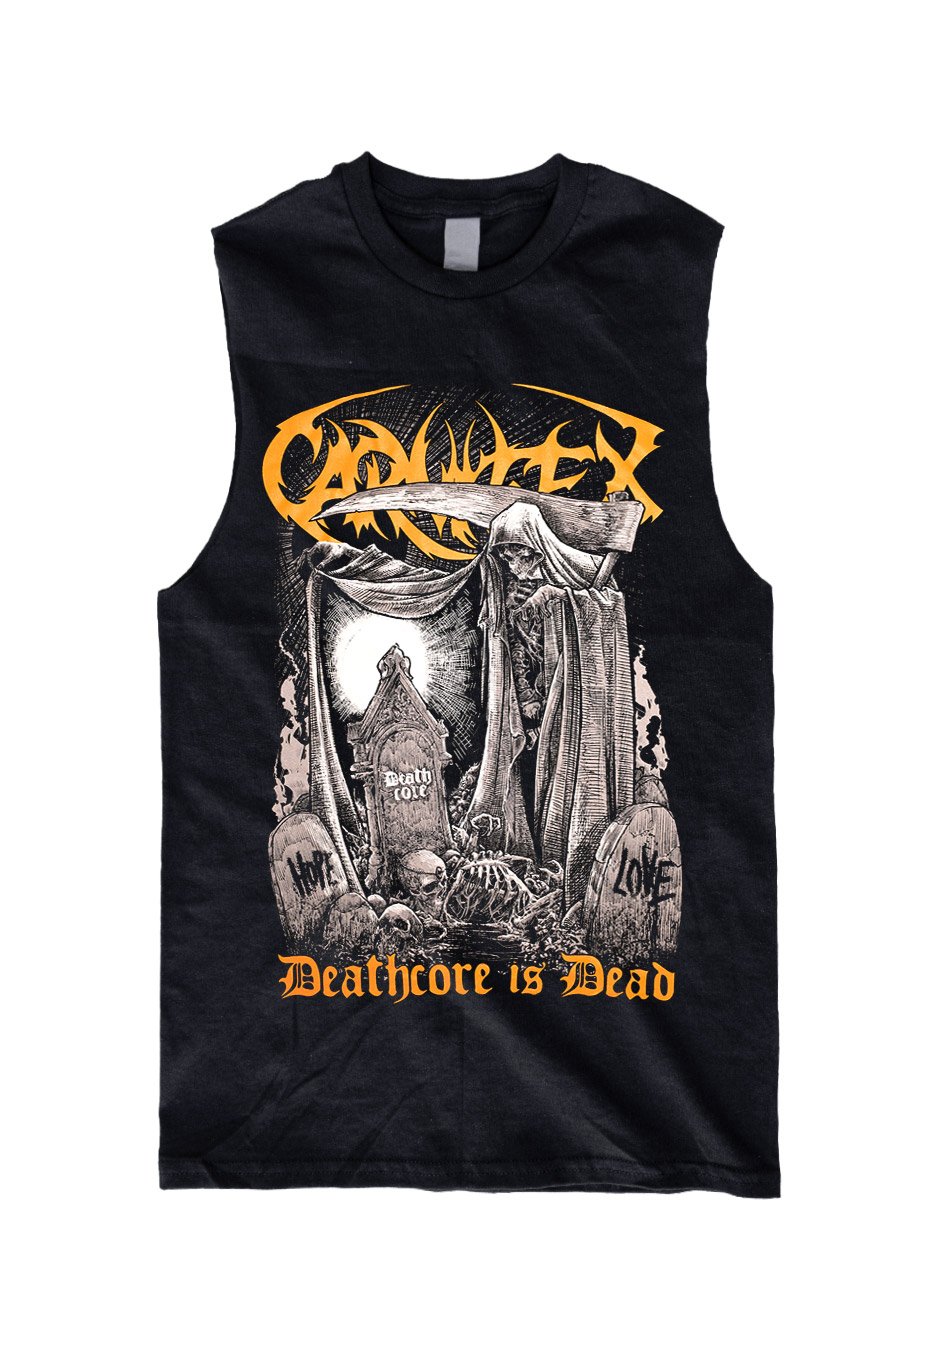 Carnifex - Deathcore Is Dead - Sleeveless